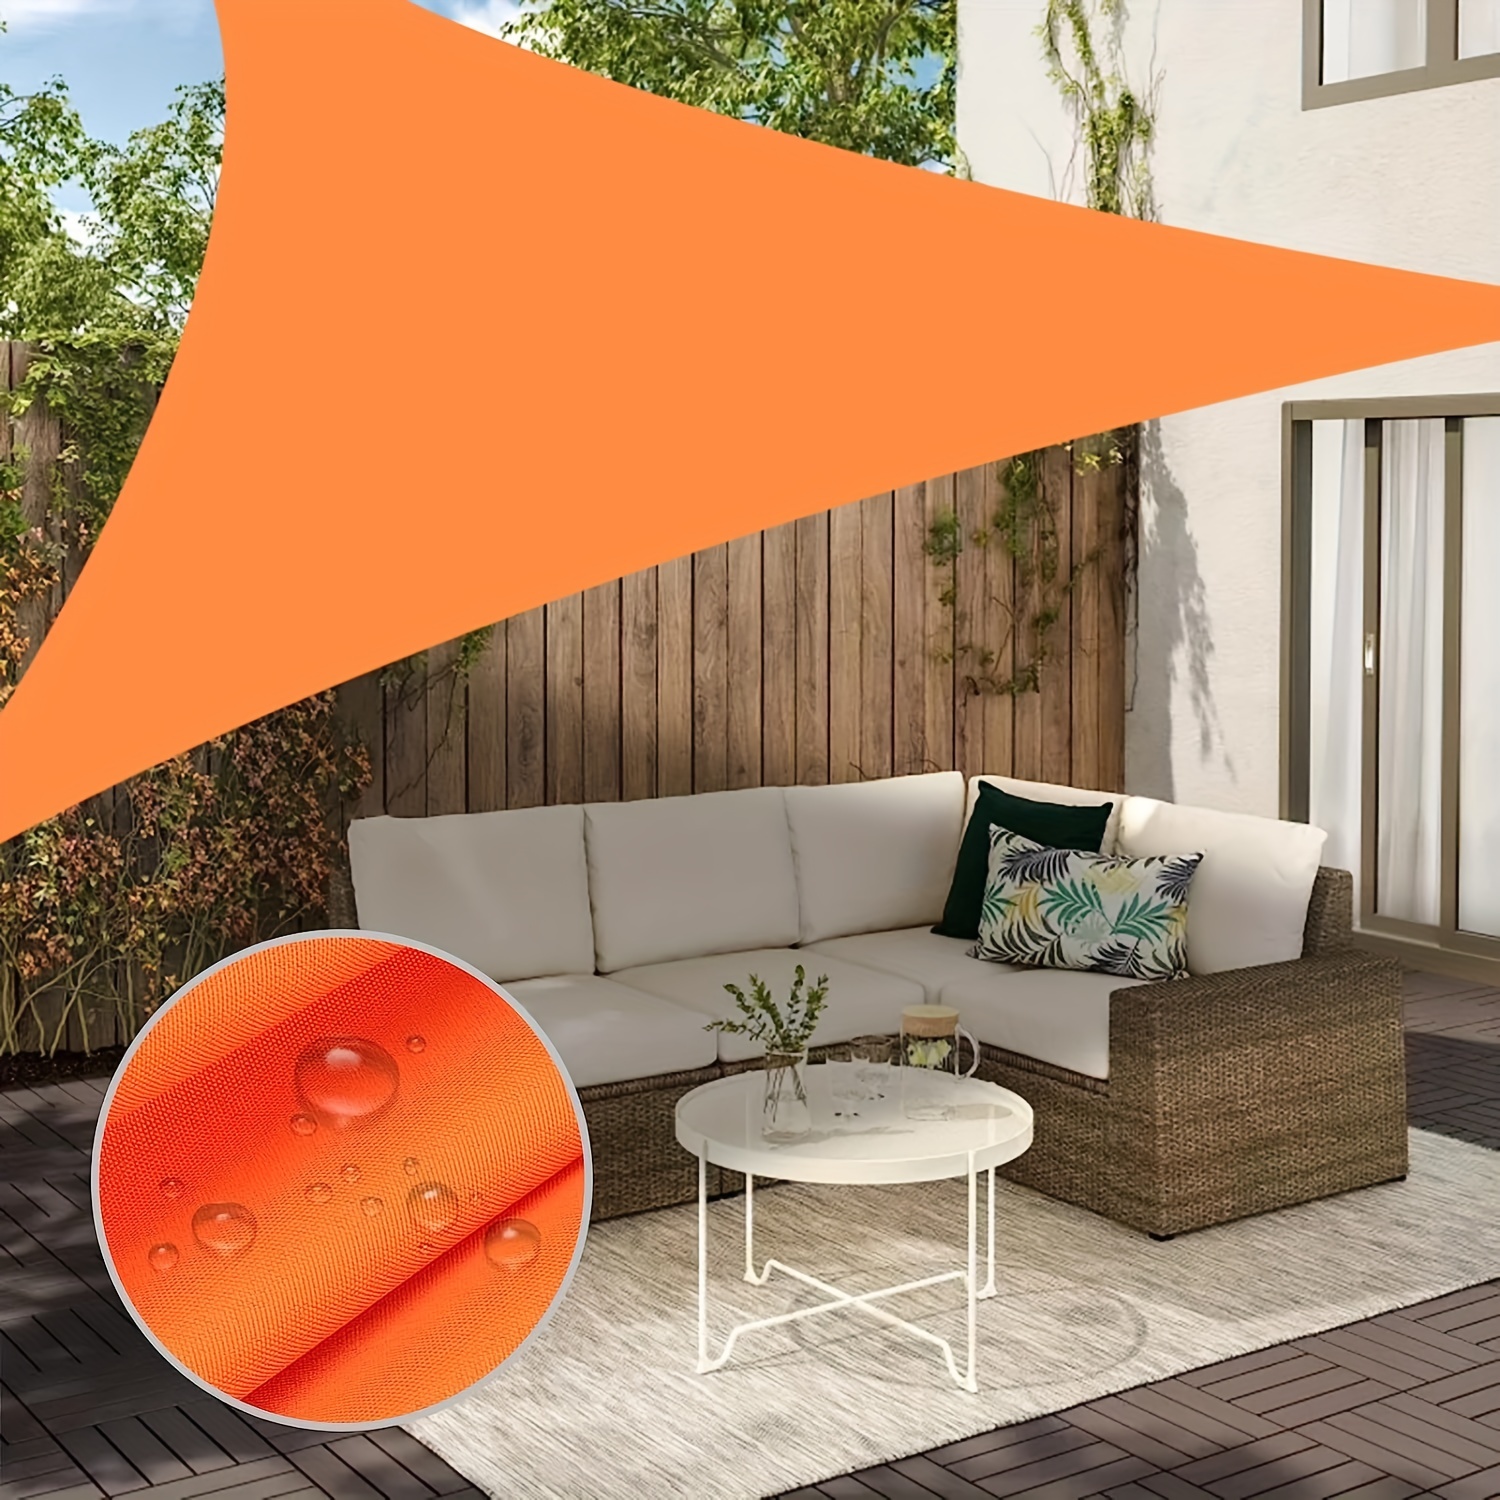 

Durable Outdoor Sun Shade For Terrace, Yard, Deck, And Garden - Waterproof And Uv Resistant Triangle Canopy